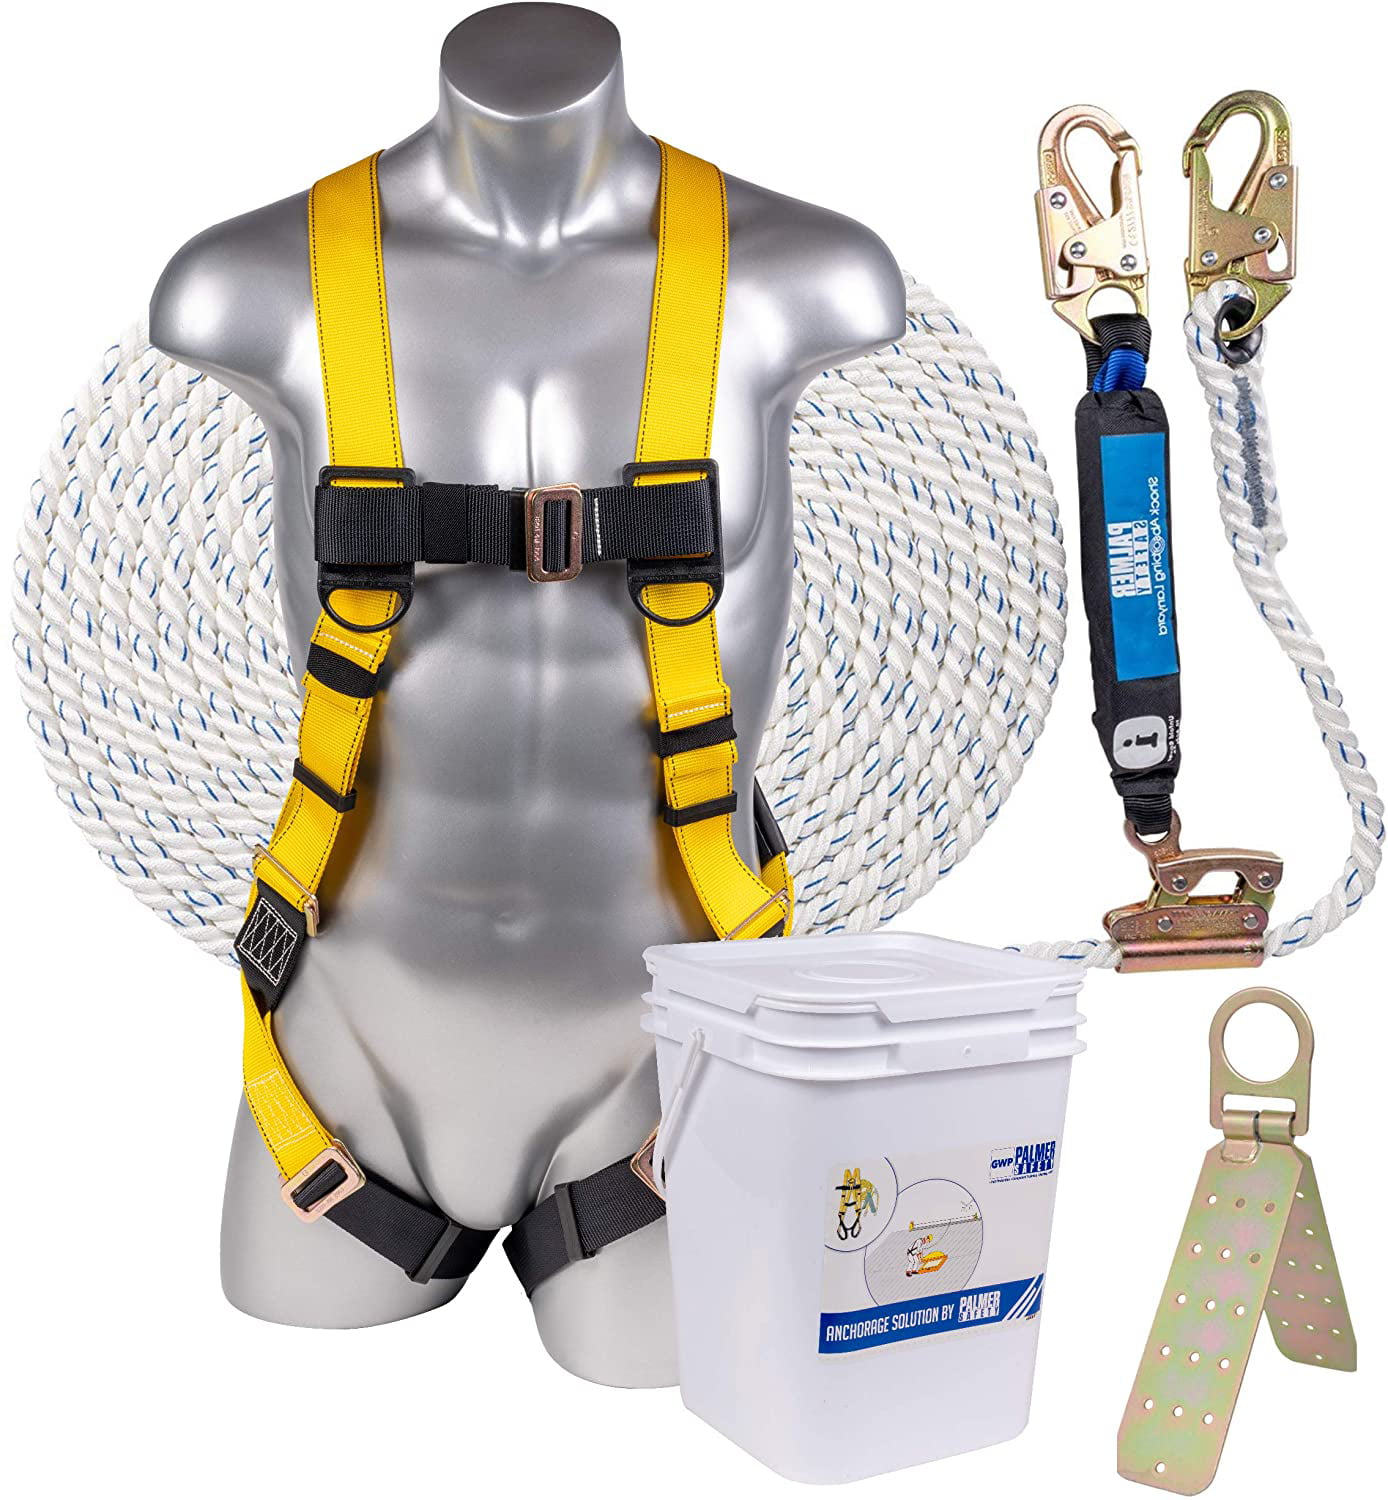 Roofers/EWP/Scaffolders Harness ZERO UTILITY Harness with Quick Connect Buckles 